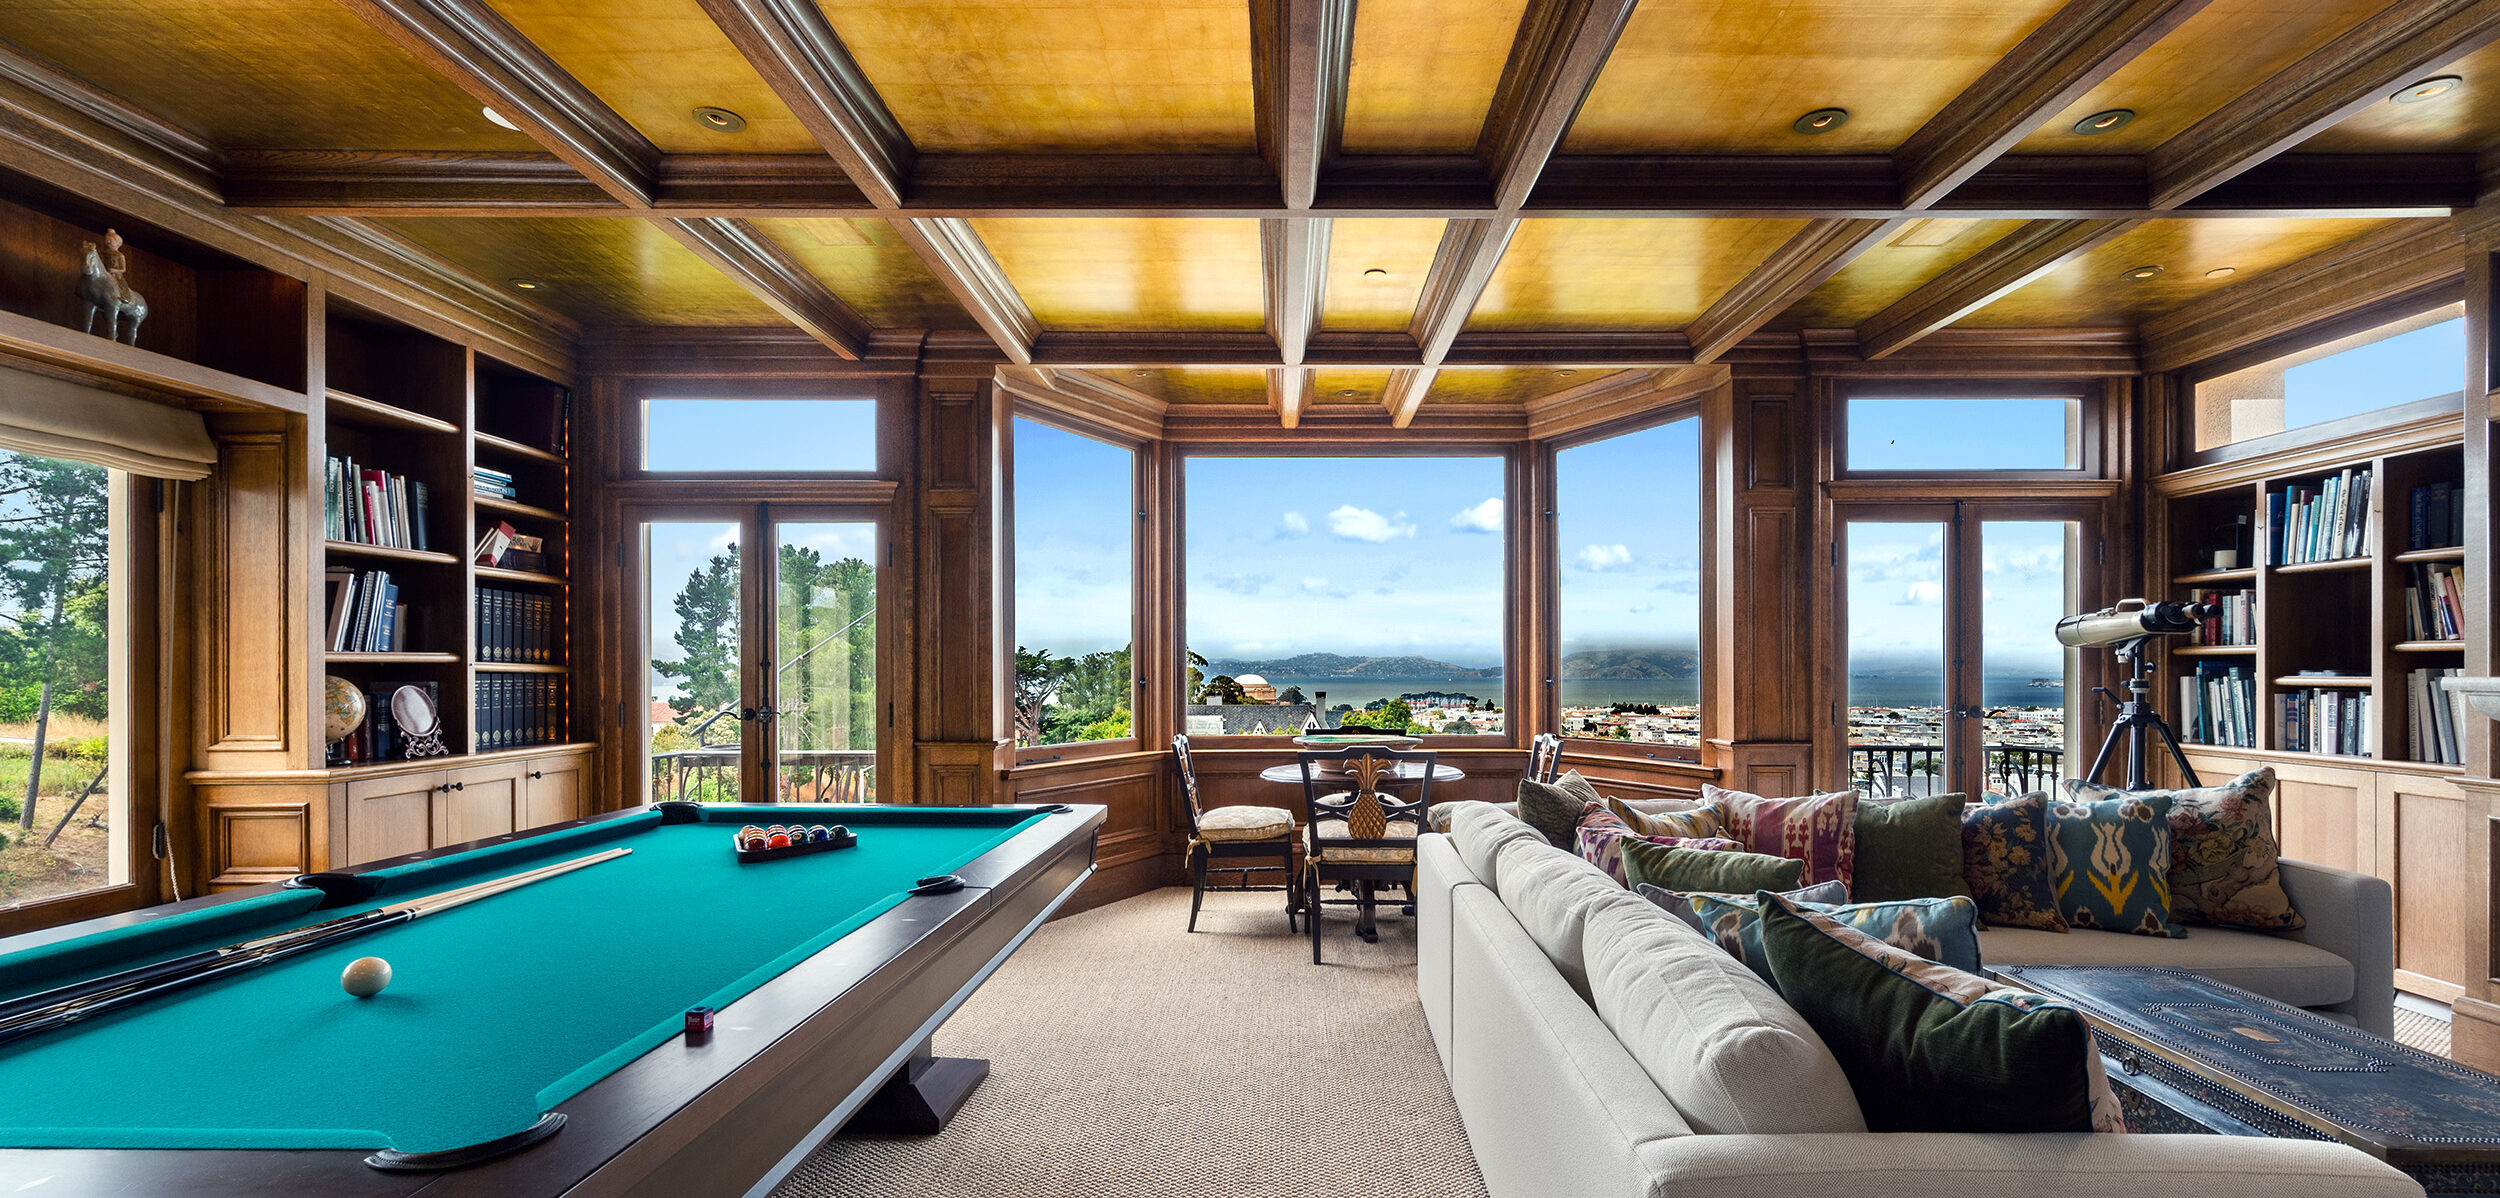 View of a large living area at 2880 Greet Street in San Francisco, featuring views of the Bay